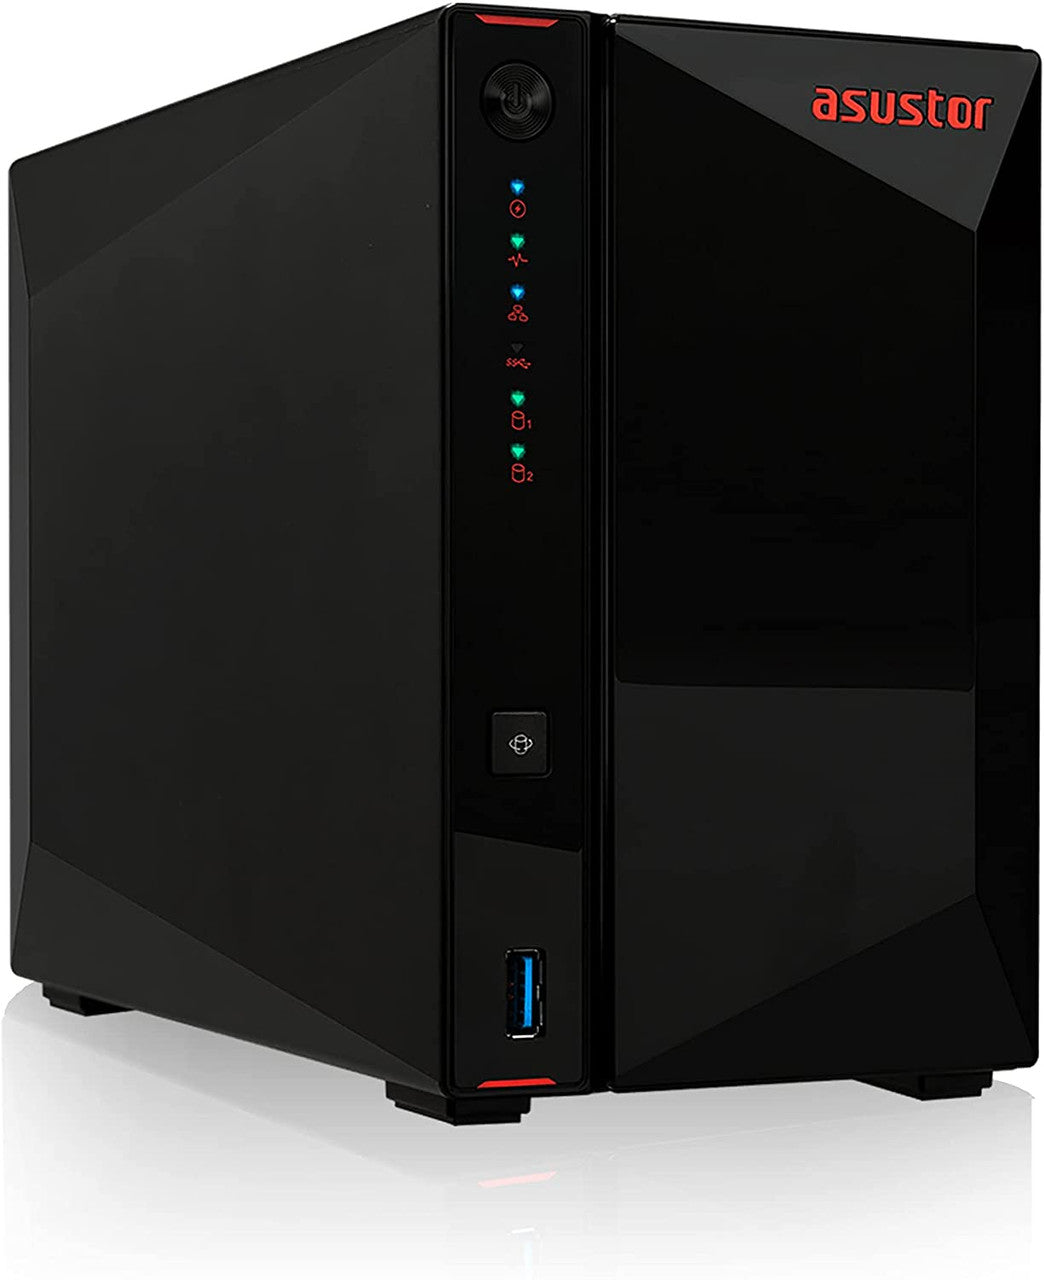 Asustor AS5202T 2-Bay Nimbustor 2 NAS with 8GB RAM and 12TB (2 x 6TB) Western Digital RED PRO Drives Fully Assembled and Tested